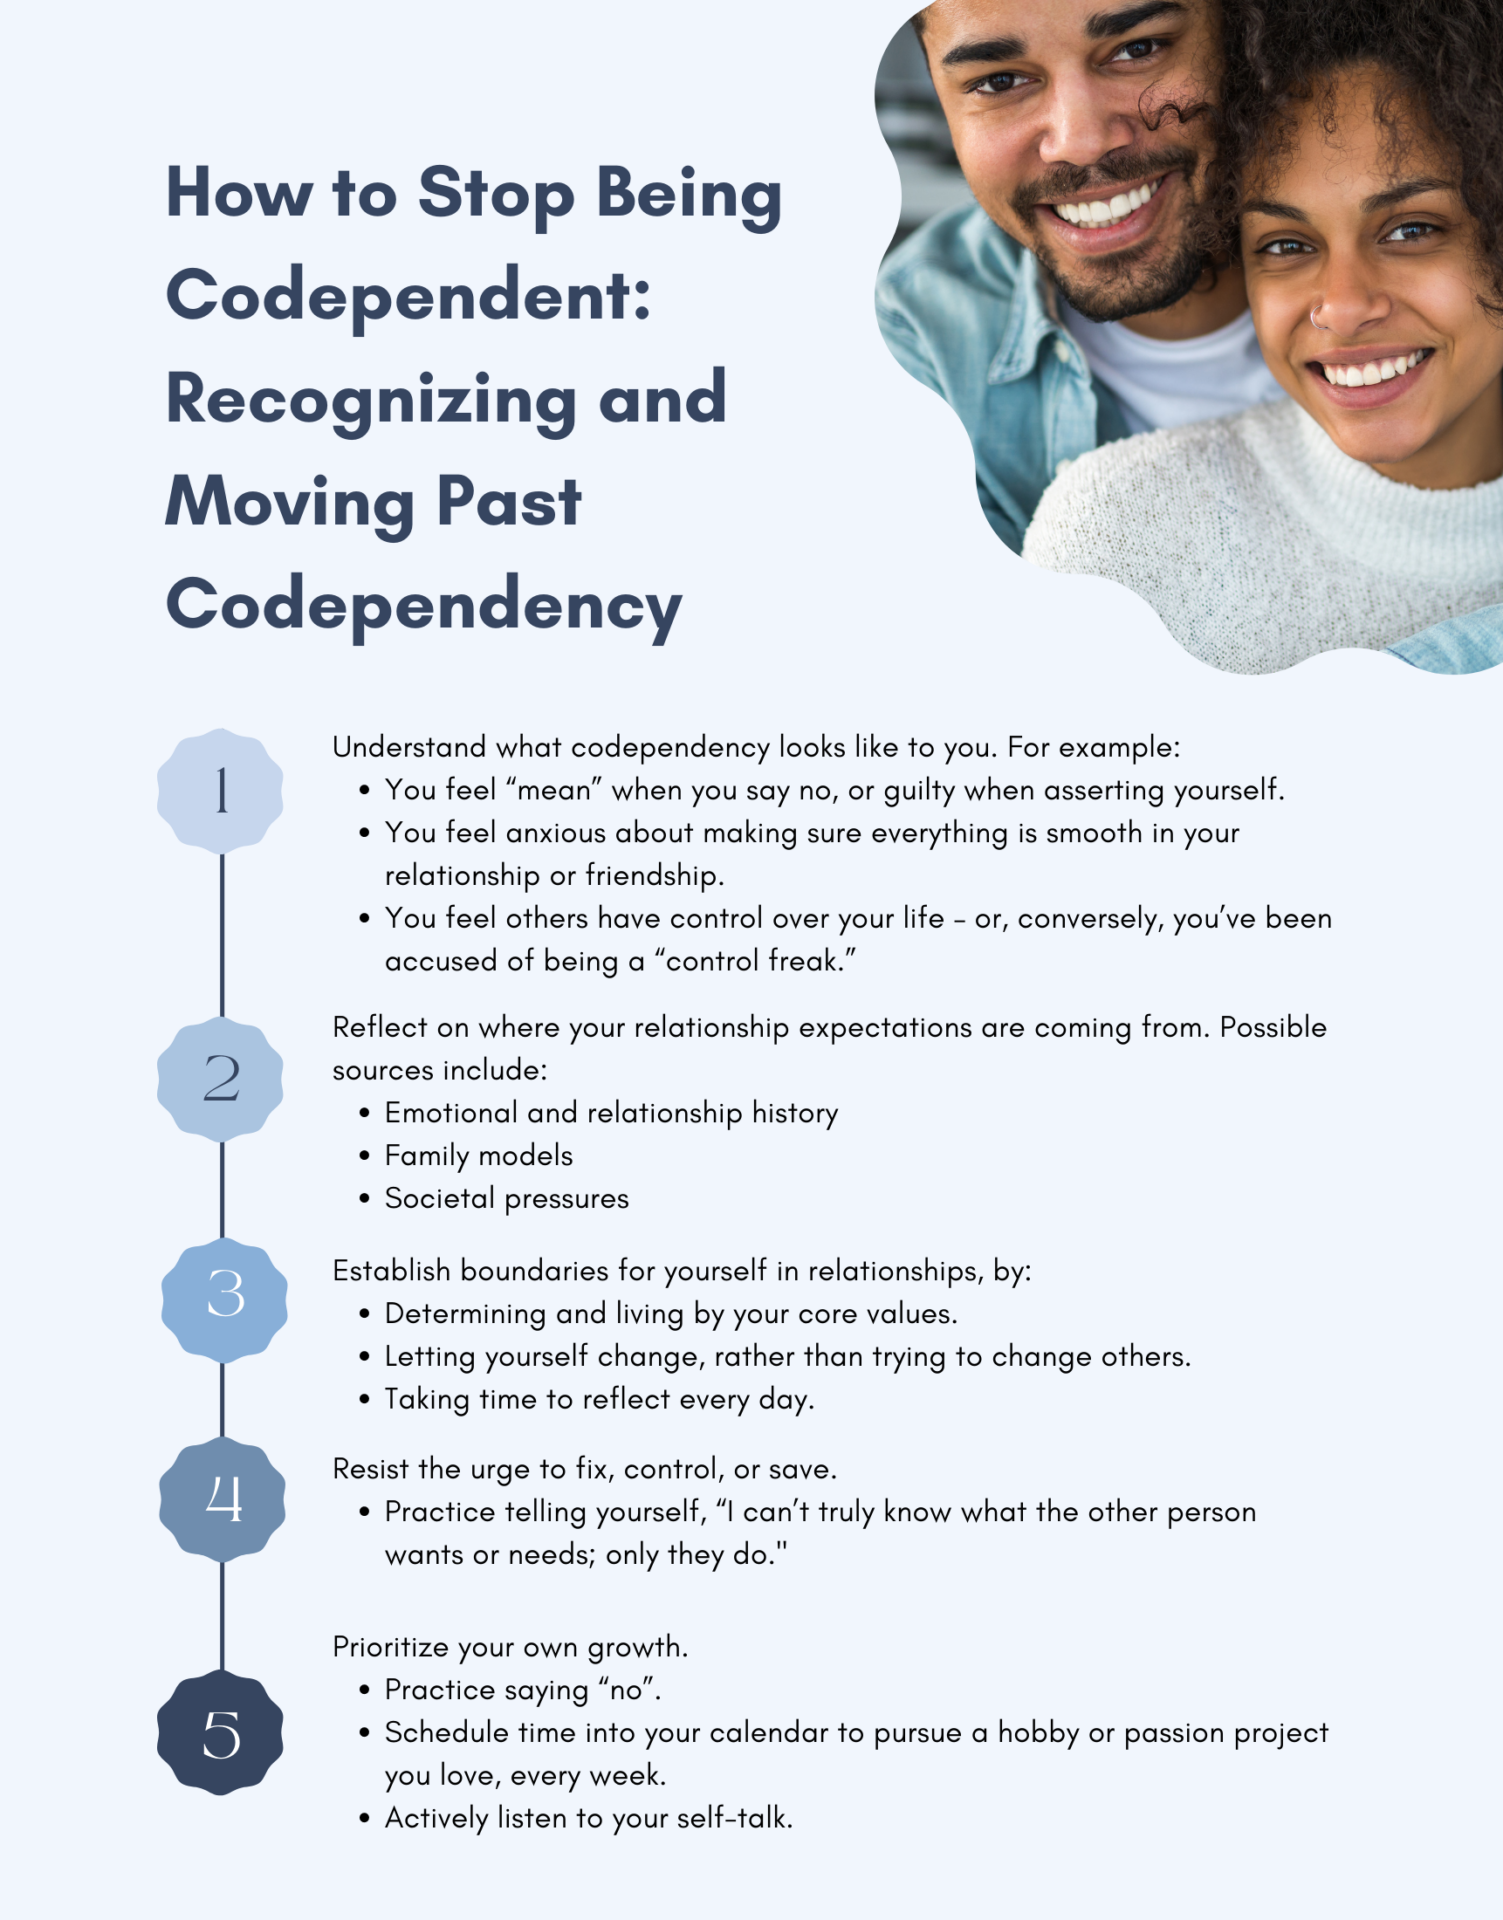 How To Overcome Codependency